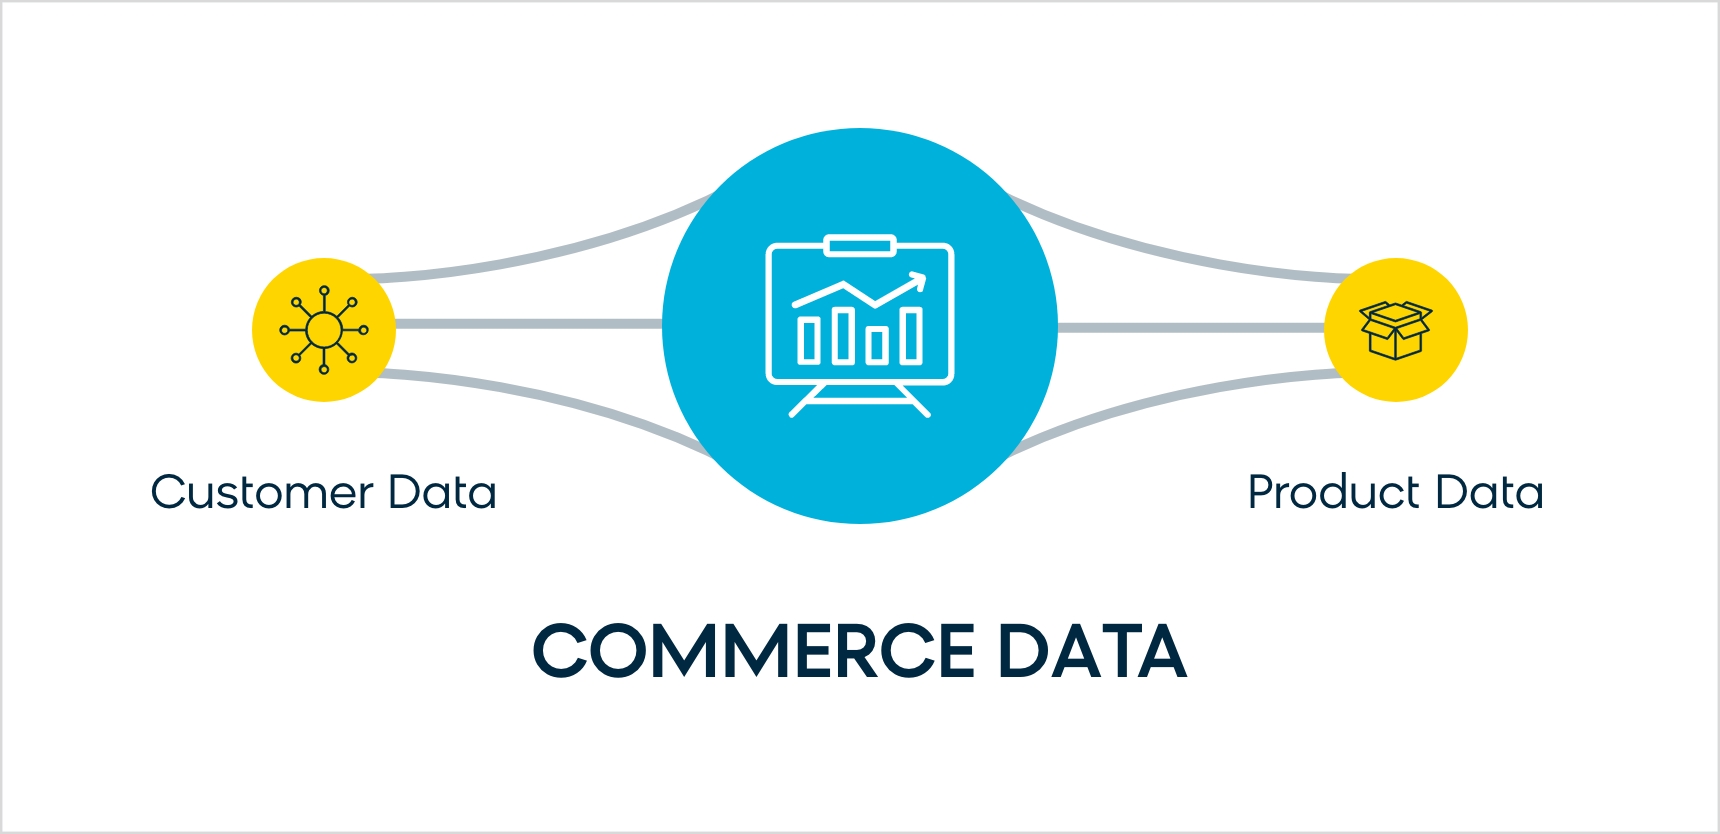 Commerce data is the combination of product data and customer data.